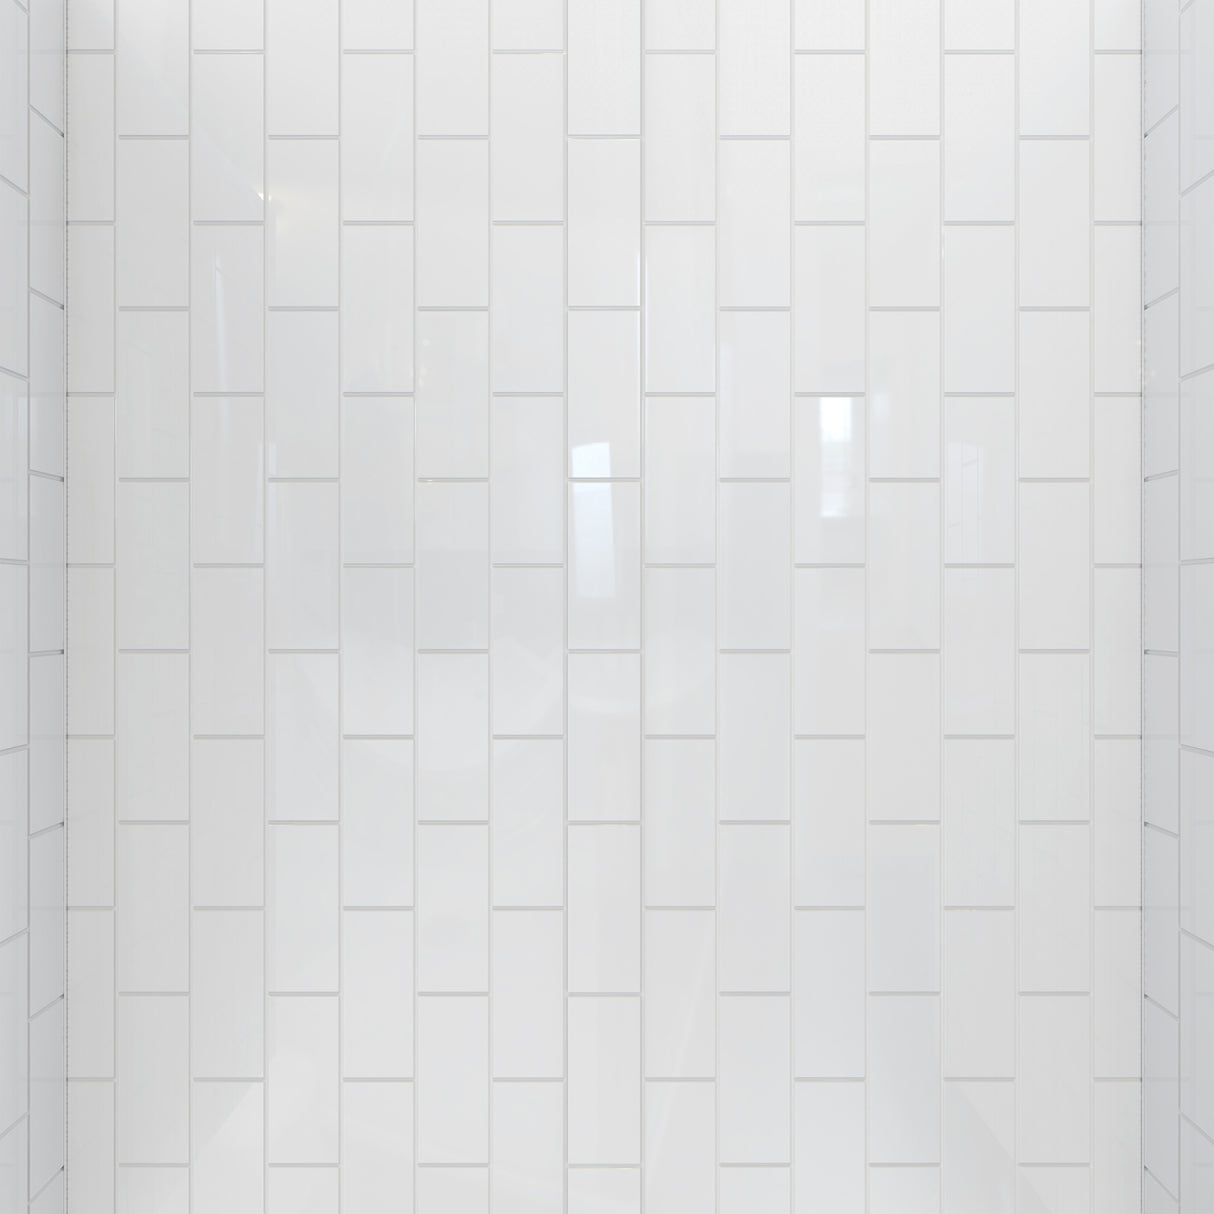 DreamLine Aqua Fold 32 in. D x 32 in. W x 78 3/4 in. H Bi-Fold Shower Door, Base, and White Wall Kit in Chrome